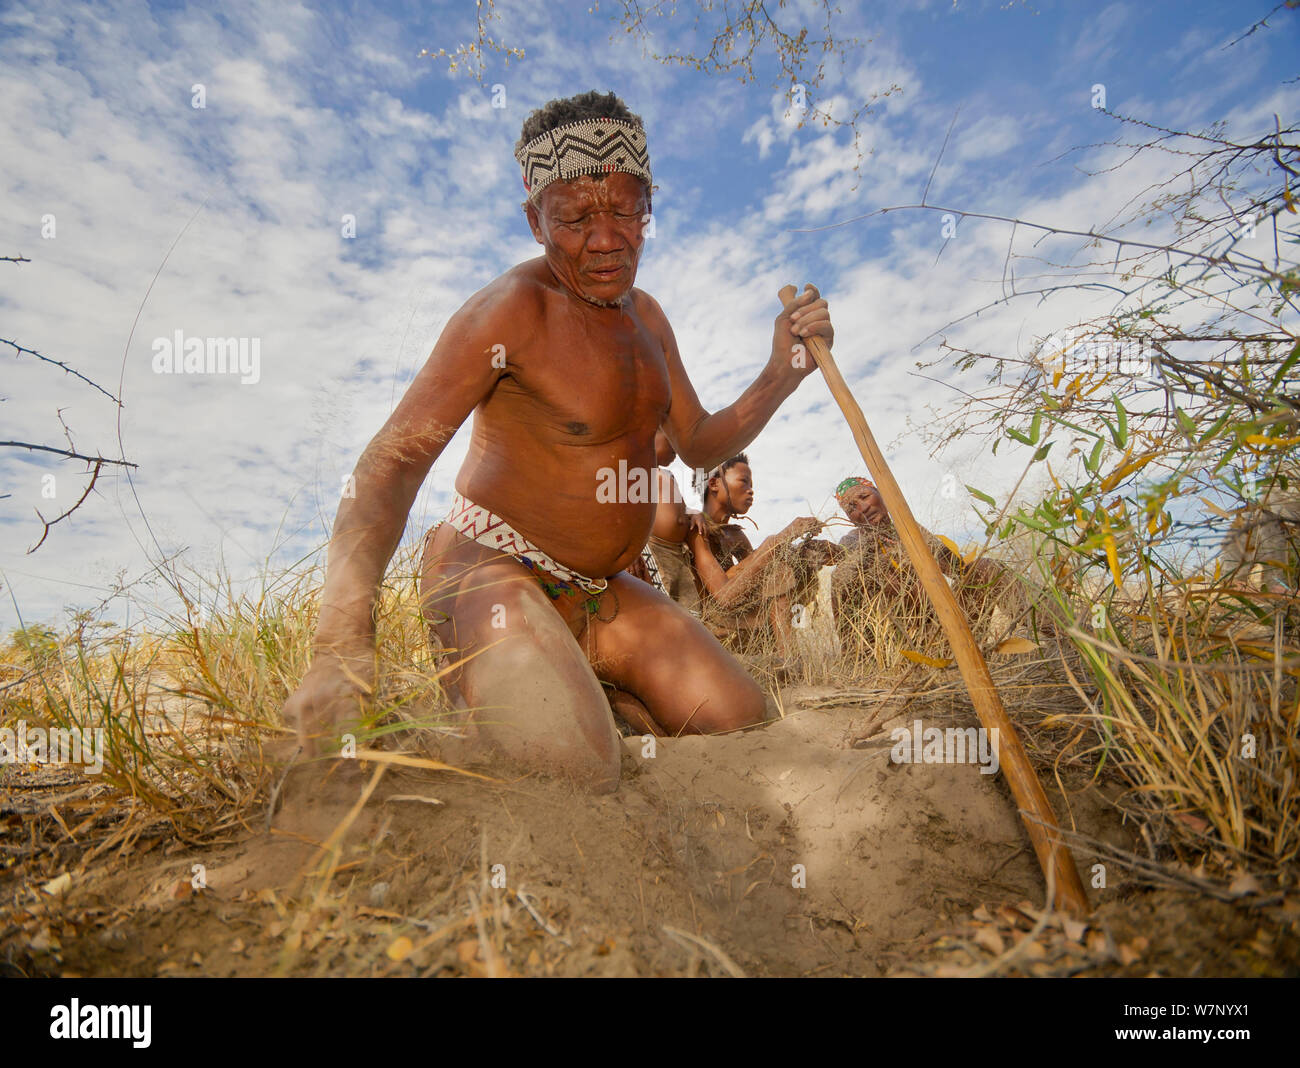 A Zu/'hoasi Bushman digs for a tuber using a stick in the dry ground of the Kalahari, Botswana. April 2012. Stock Photo